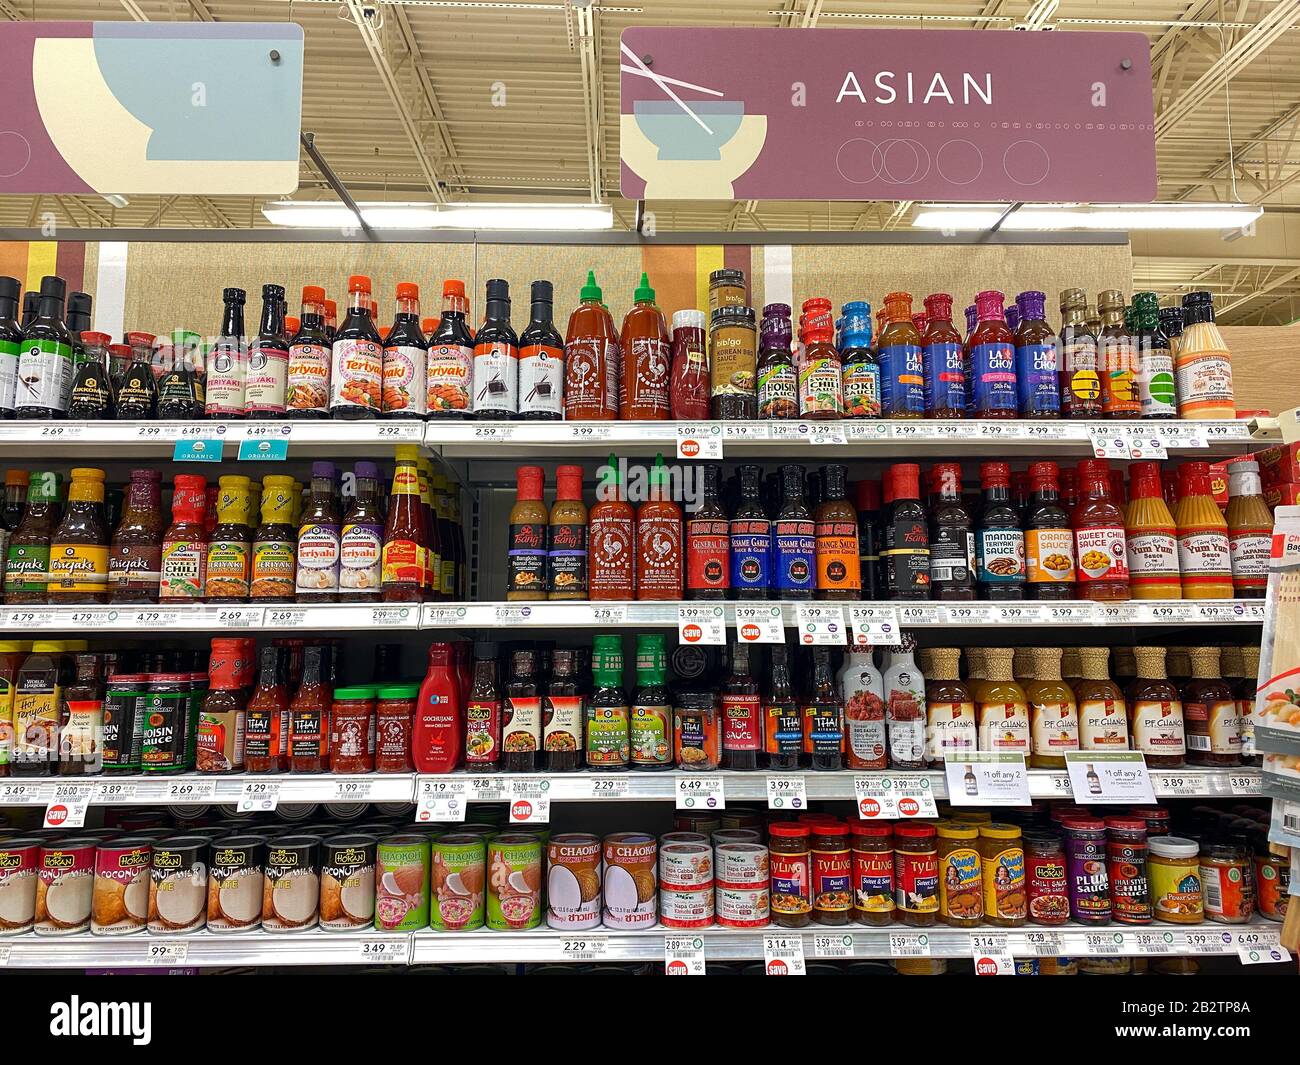 https://c8.alamy.com/comp/2B2TP8A/orlando-flusa-21220-the-asian-sauce-aisle-at-a-publix-grocery-store-with-a-variety-of-sauces-waiting-for-customers-to-purchase-2B2TP8A.jpg